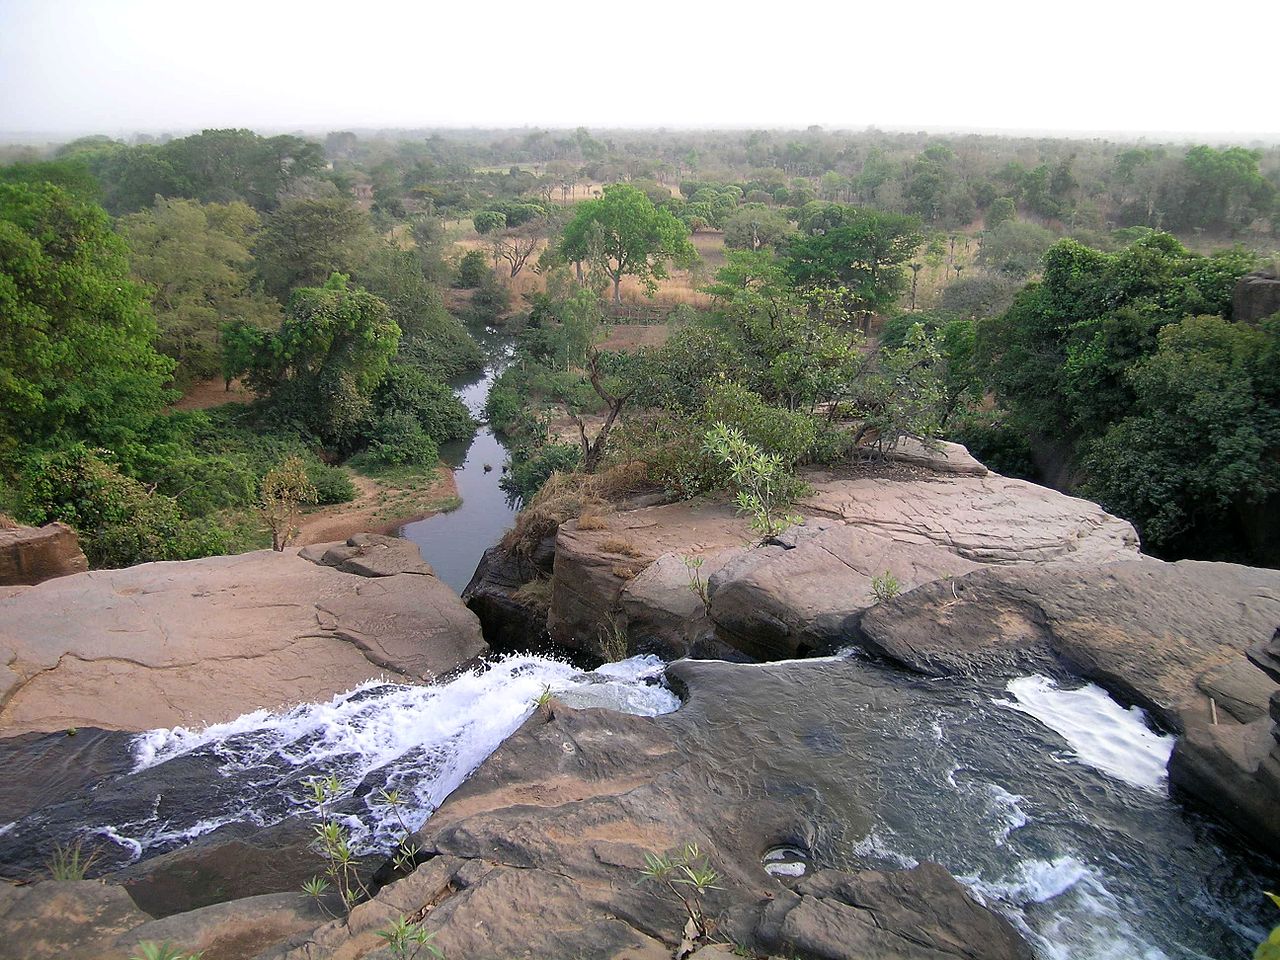 Experience the wonder of Karfiguela Falls in Burkina Faso! 🌊 Marvel at the majestic cascades and immerse yourself in the natural beauty of West Africa. Photo Credit: flickr.com